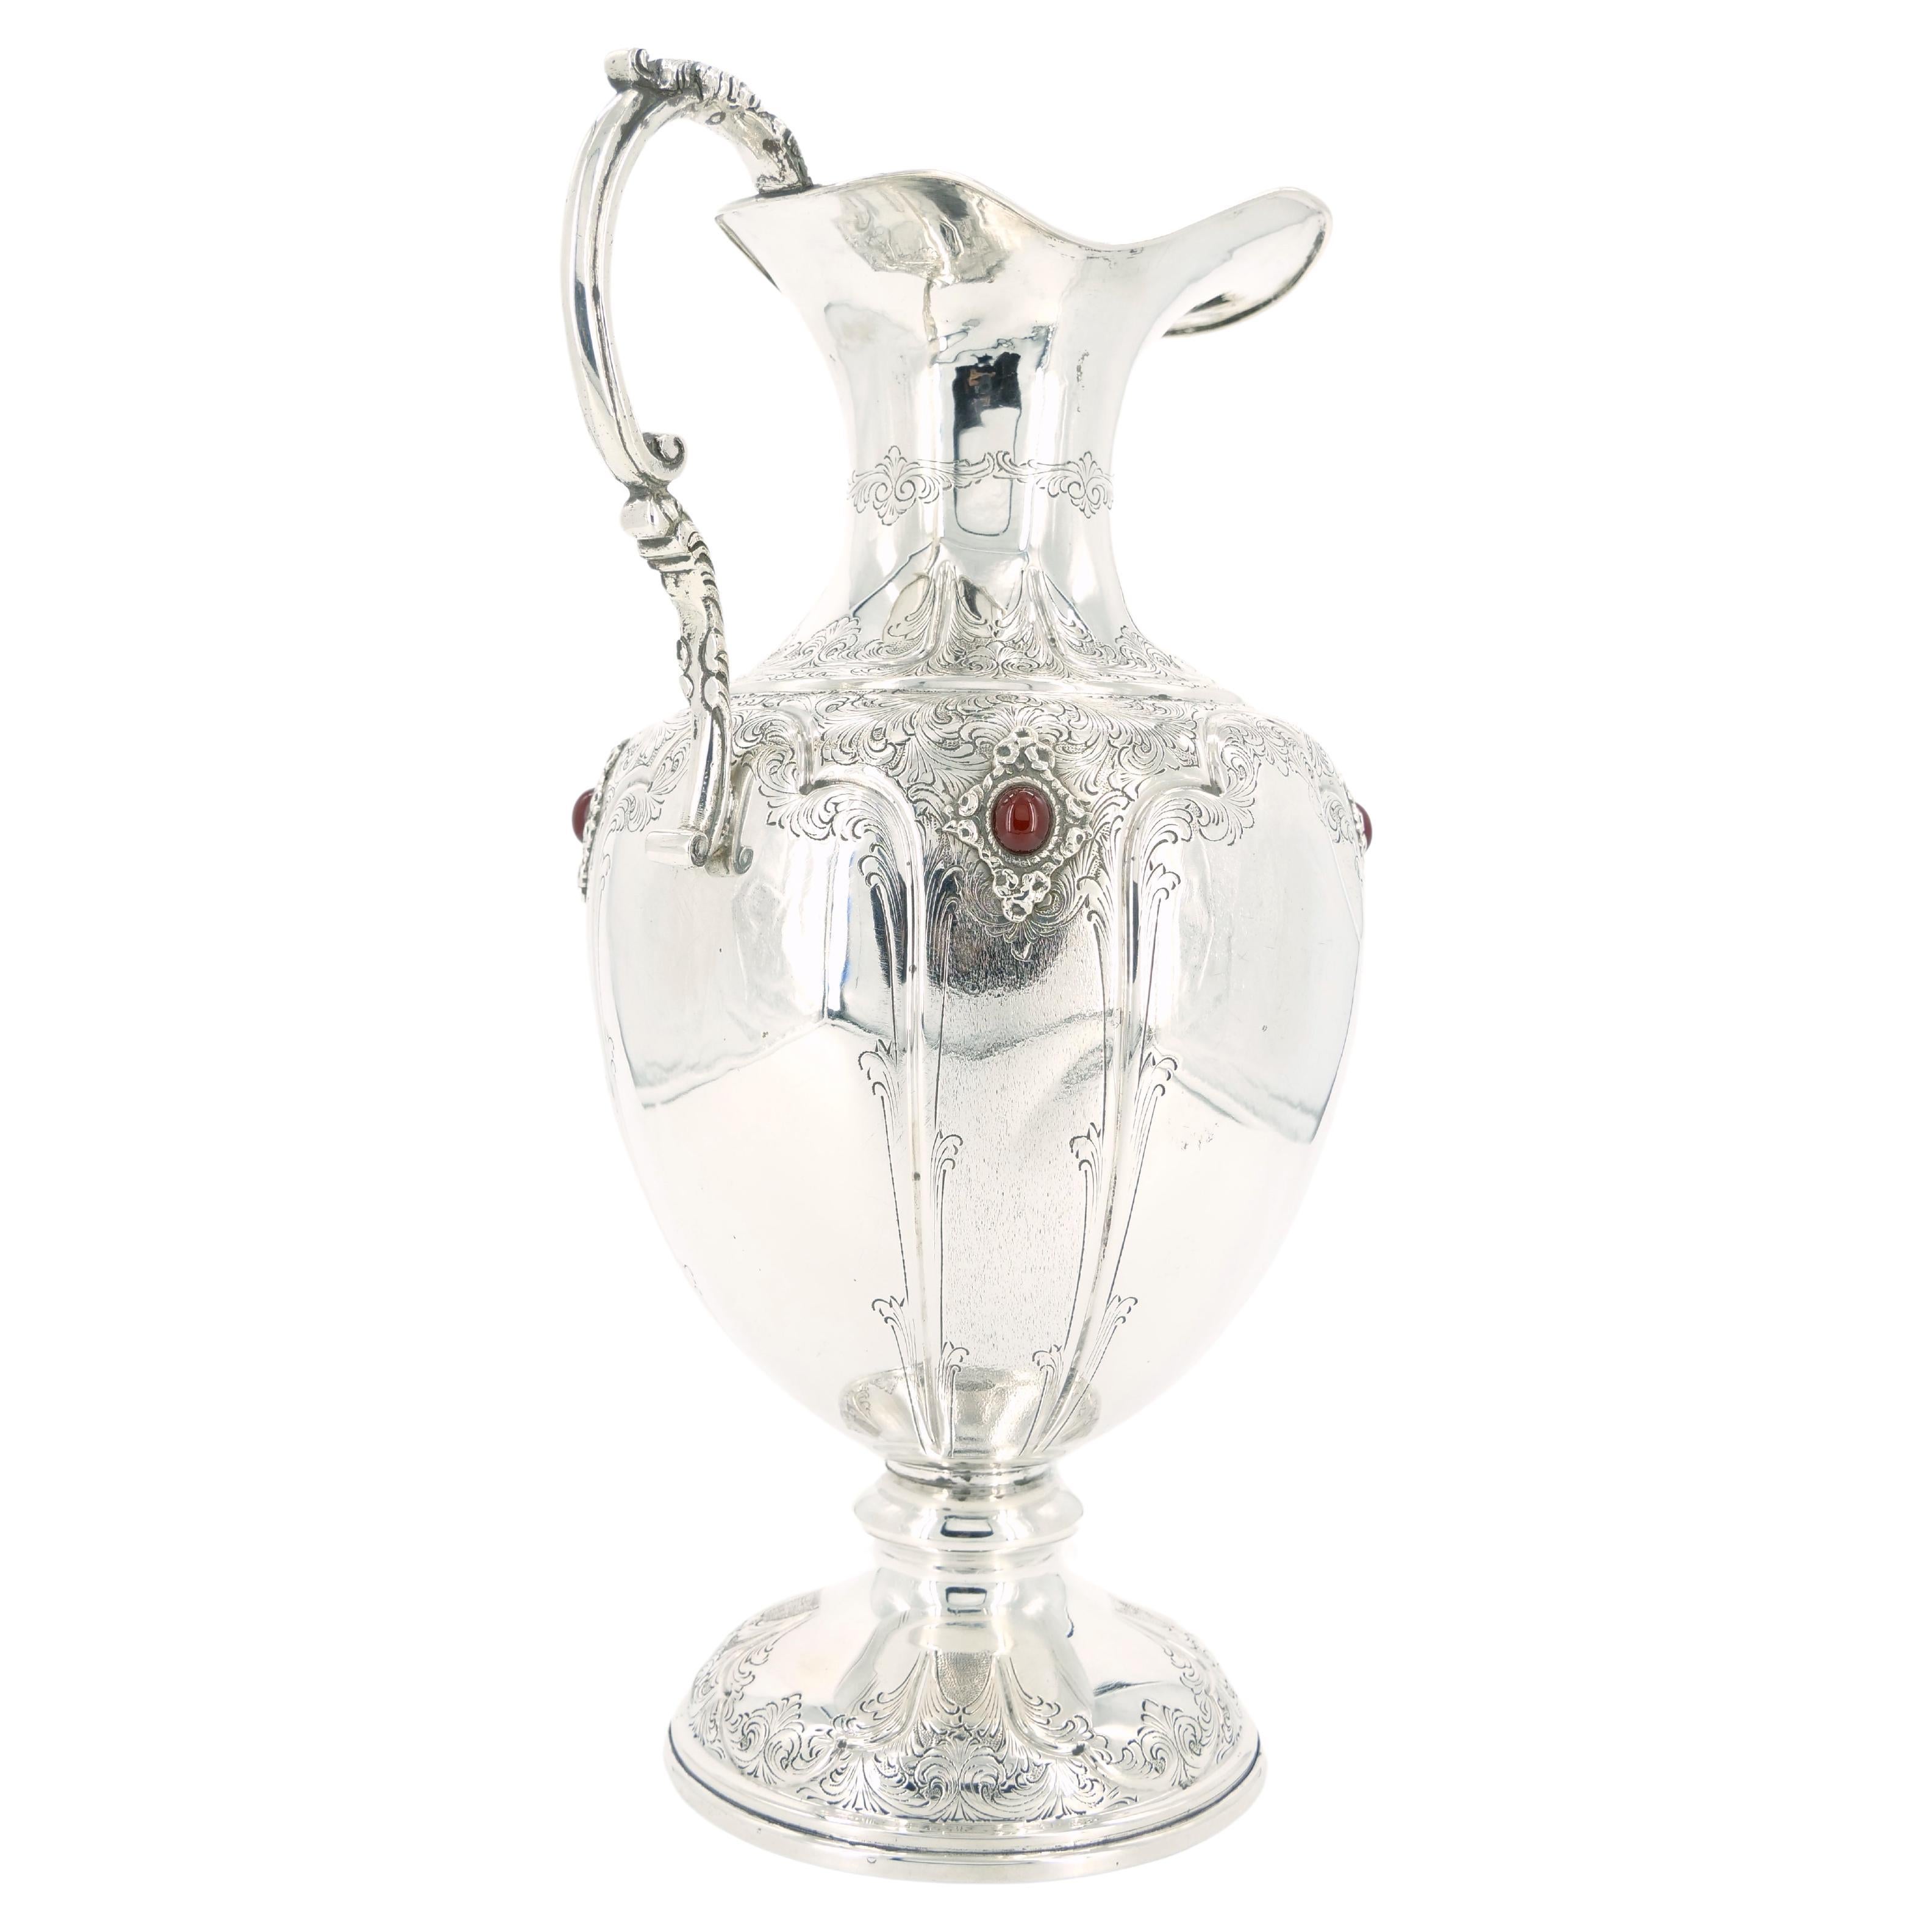 Italian Sterling Silver / Precious Stone One Handled Decorative Vase / Piece For Sale